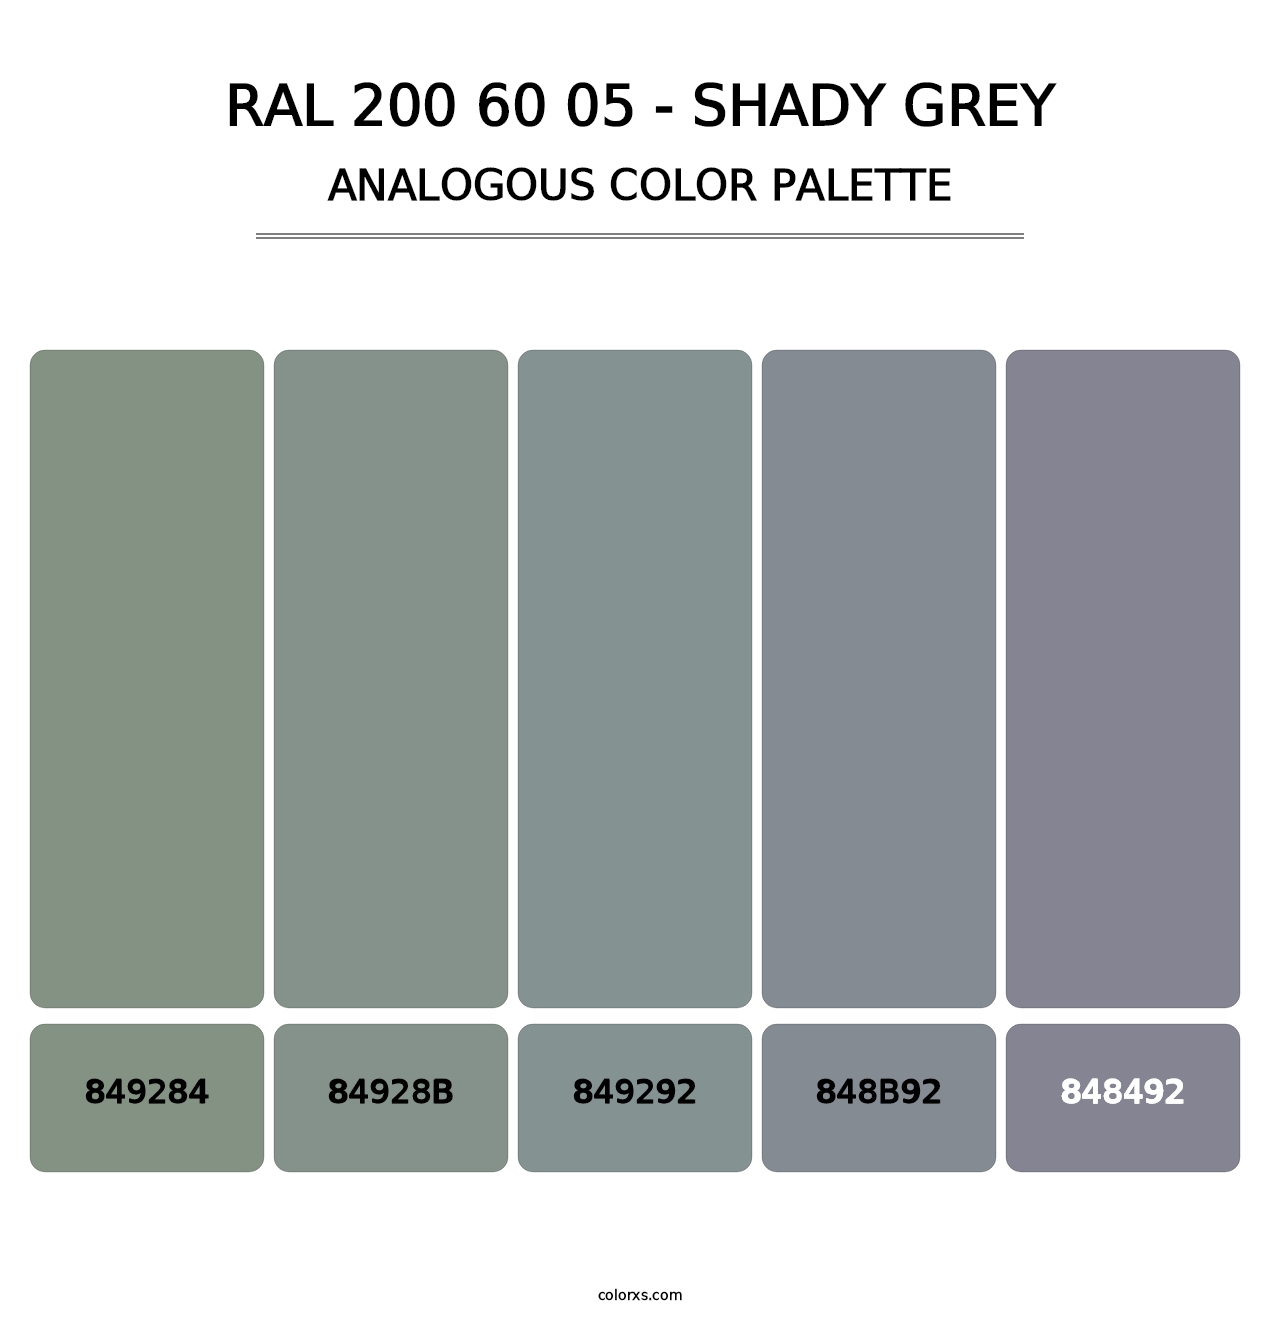 RAL 200 60 05 - Shady Grey - Analogous Color Palette